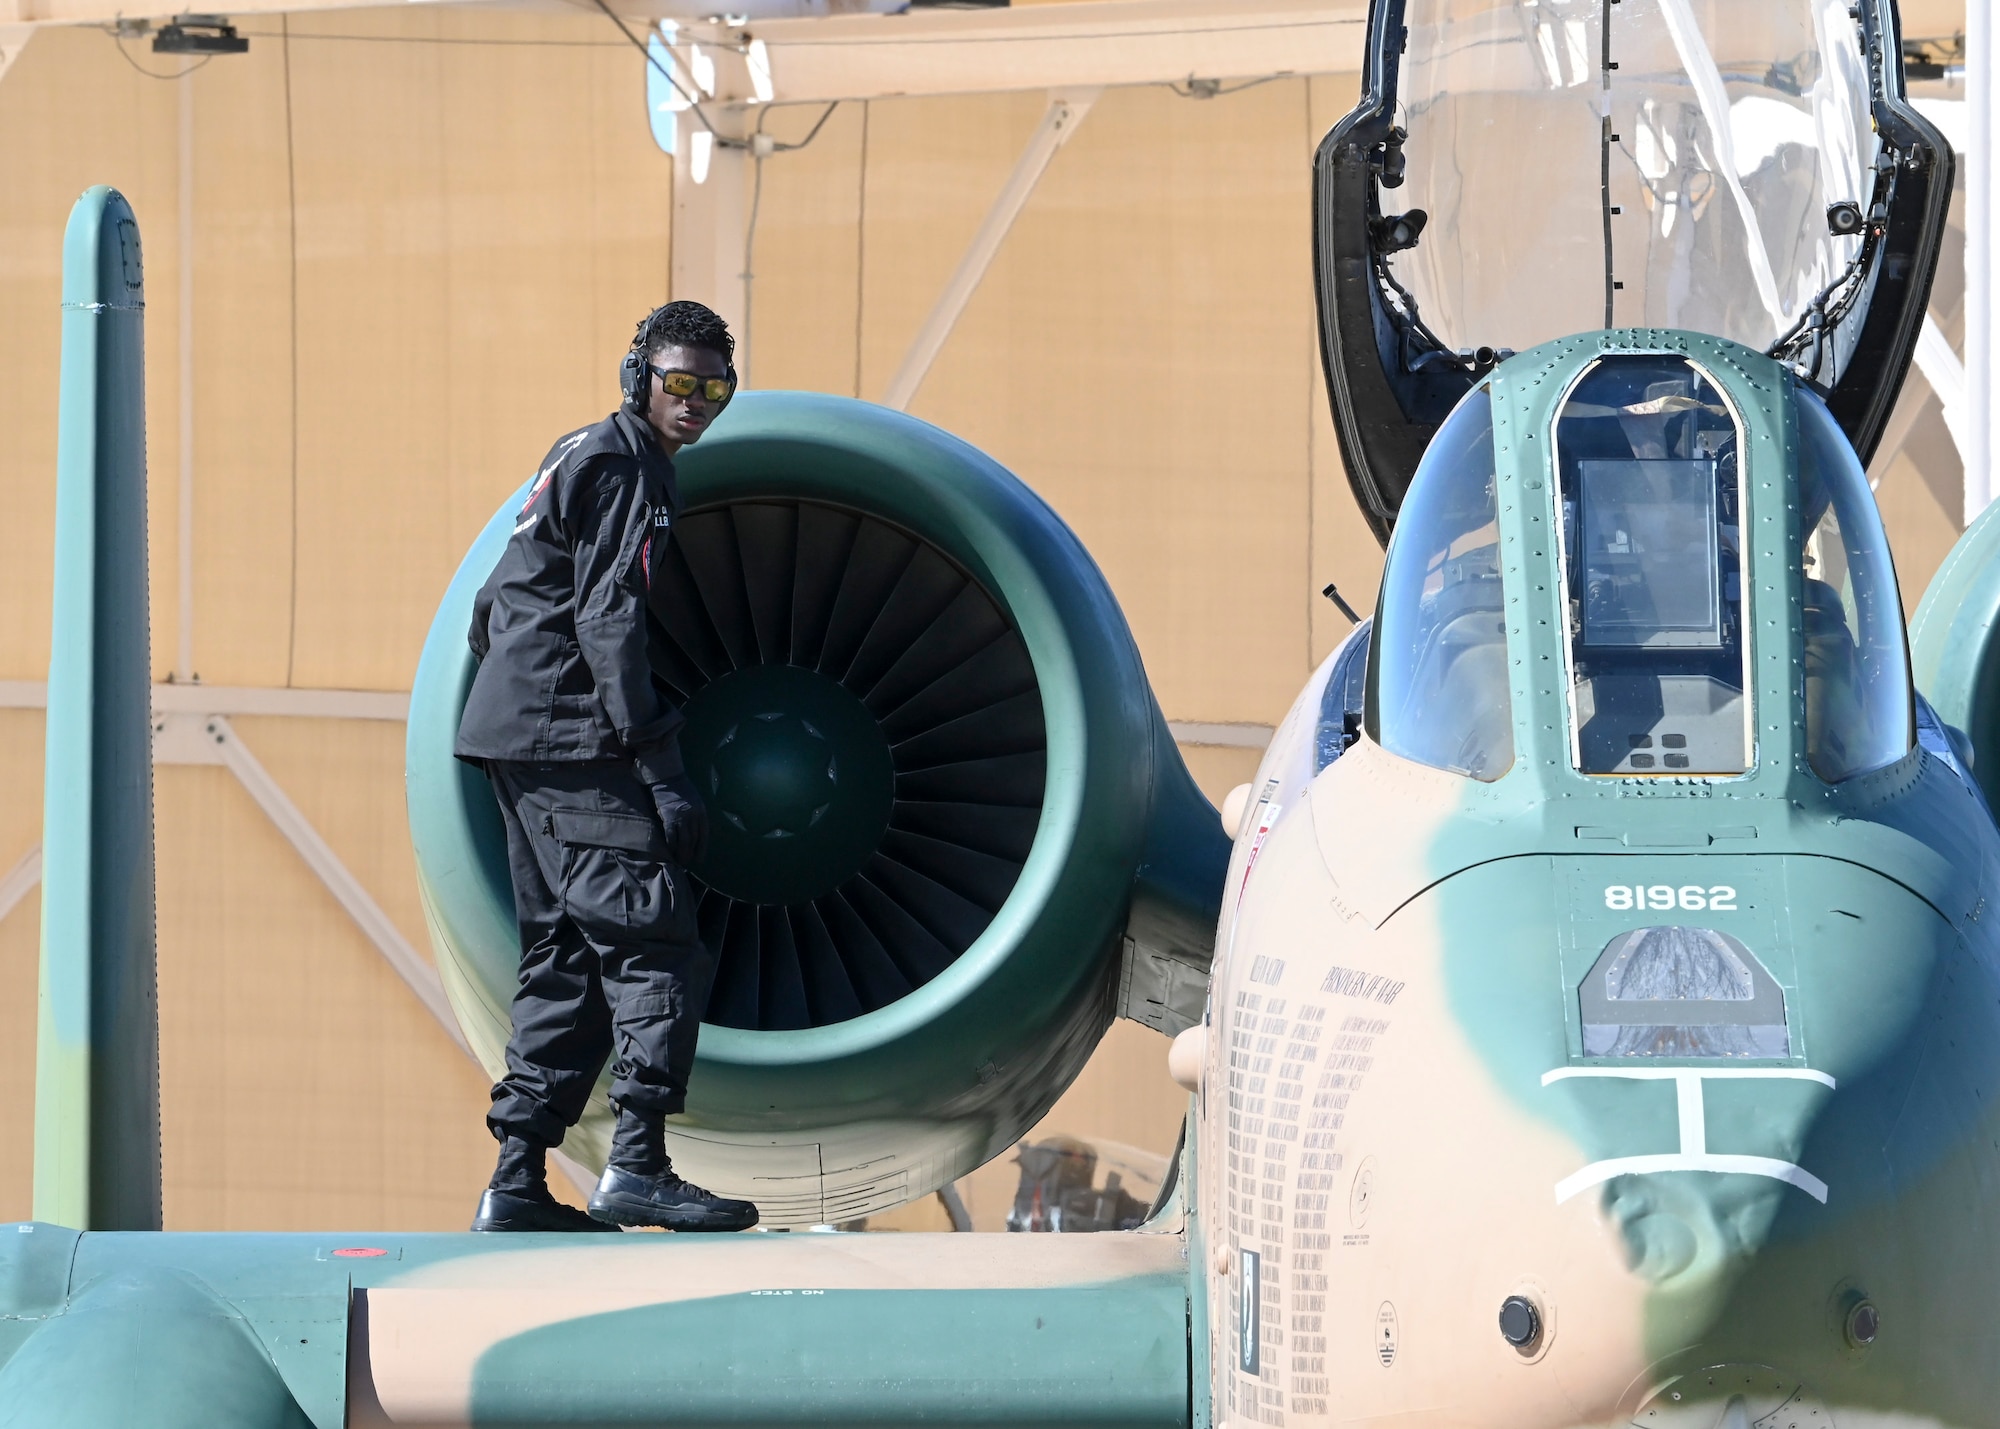 A photo of a man in a military uniform working on an aircraft.